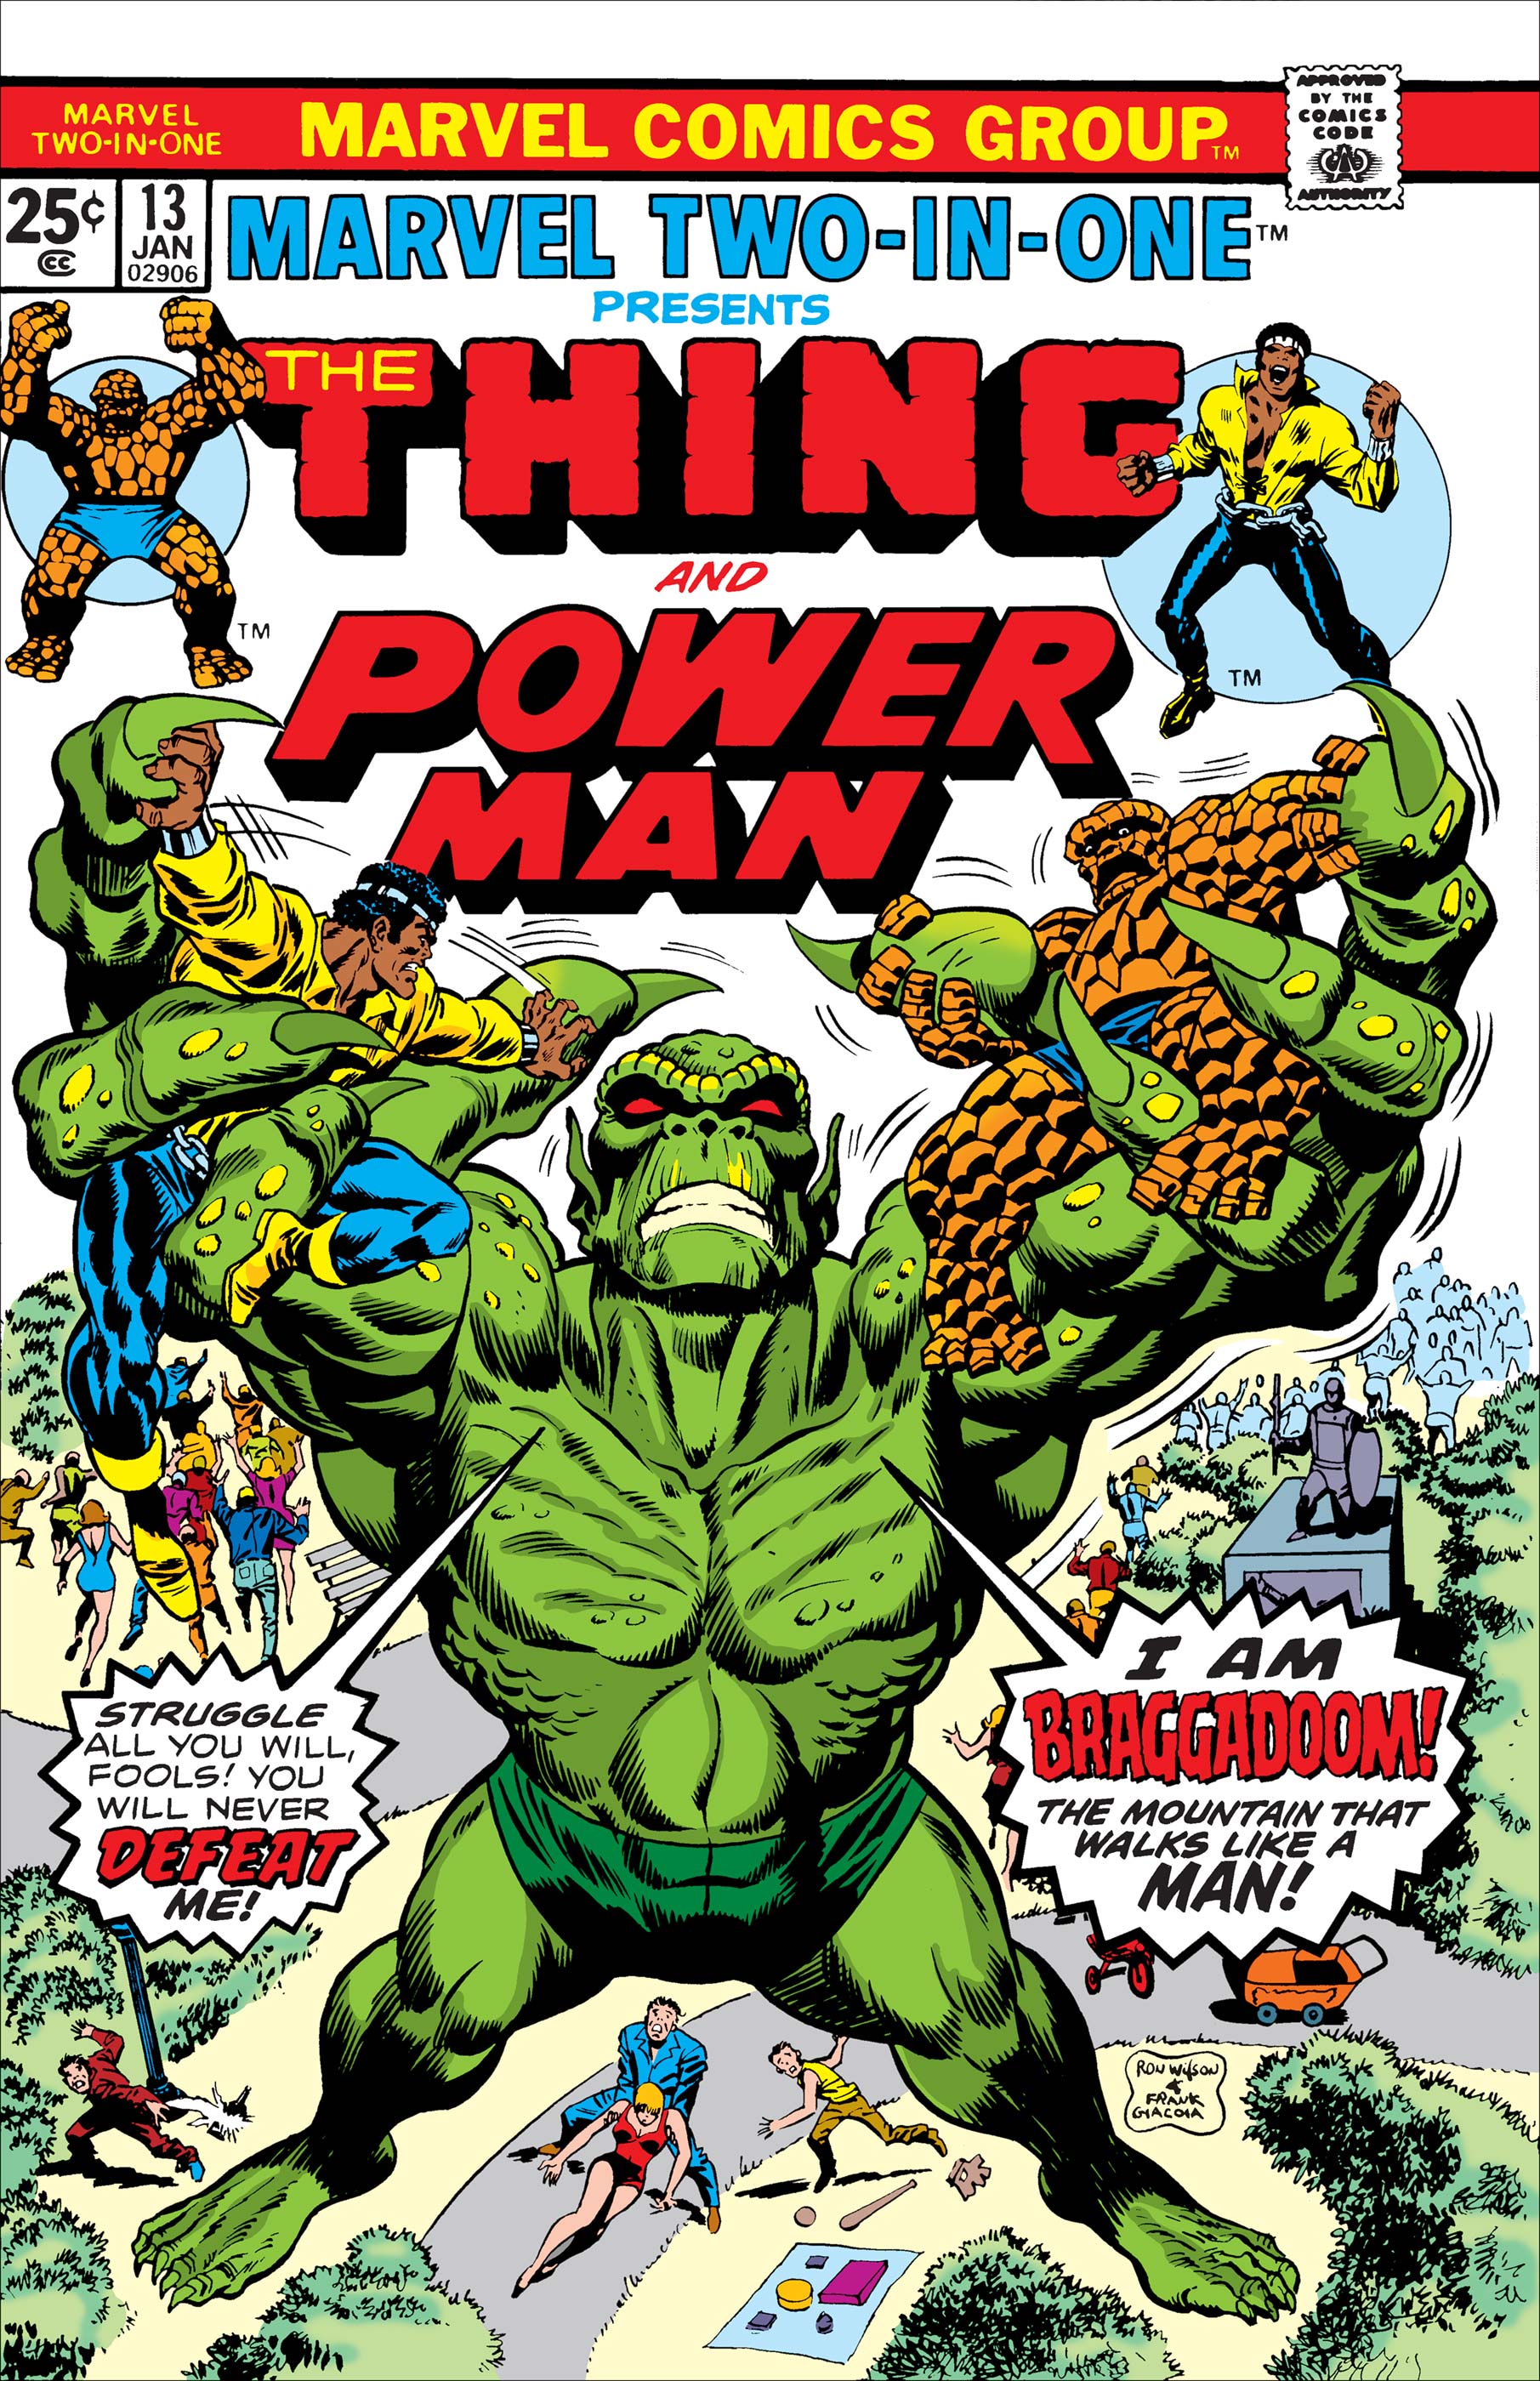 Marvel Two-in-One (1974) #13